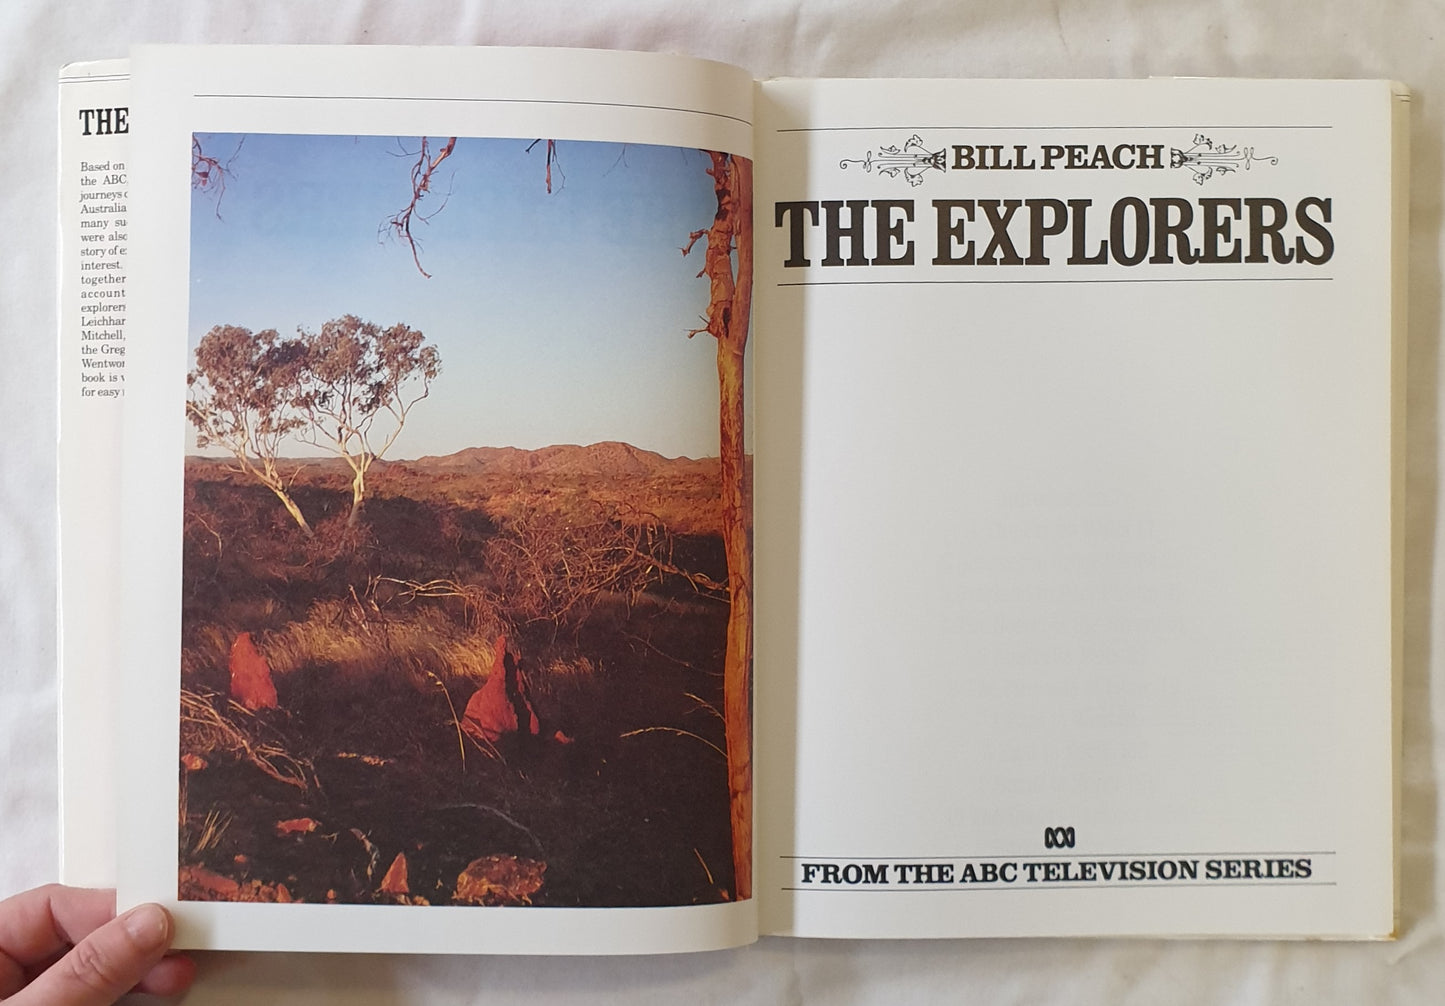 The Explorers  by Bill Peach  From the ABC Television Series